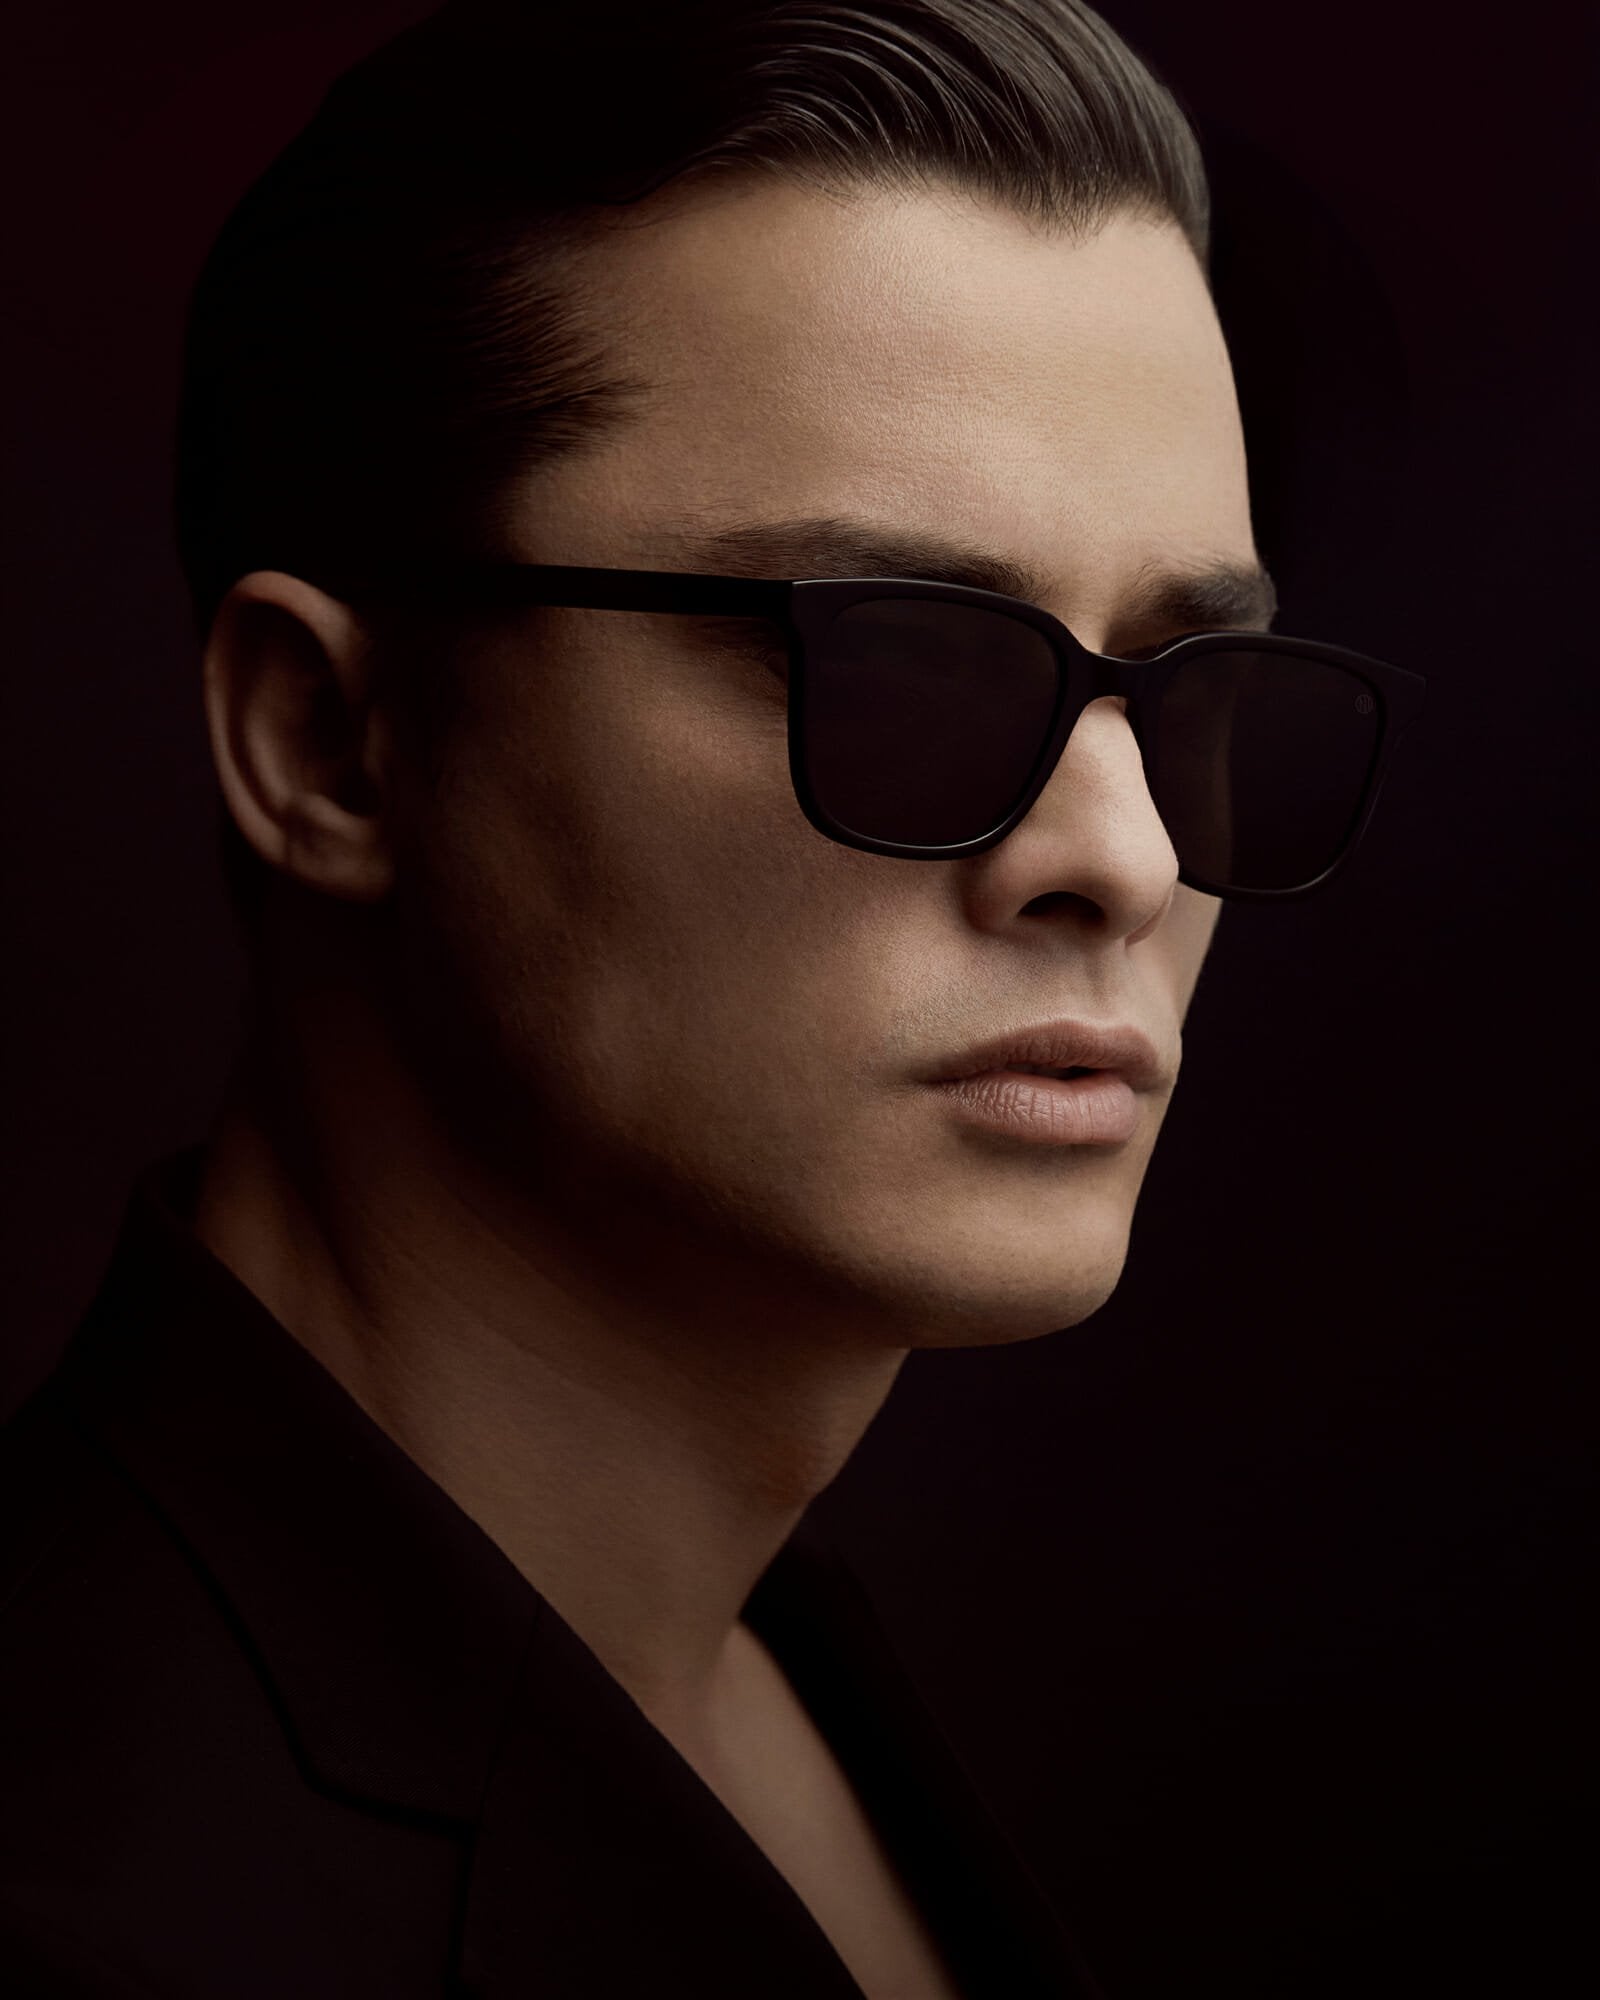 Portrait of a dark haired man who is wearing a black suit and black sunglasses. Viewed from the side.